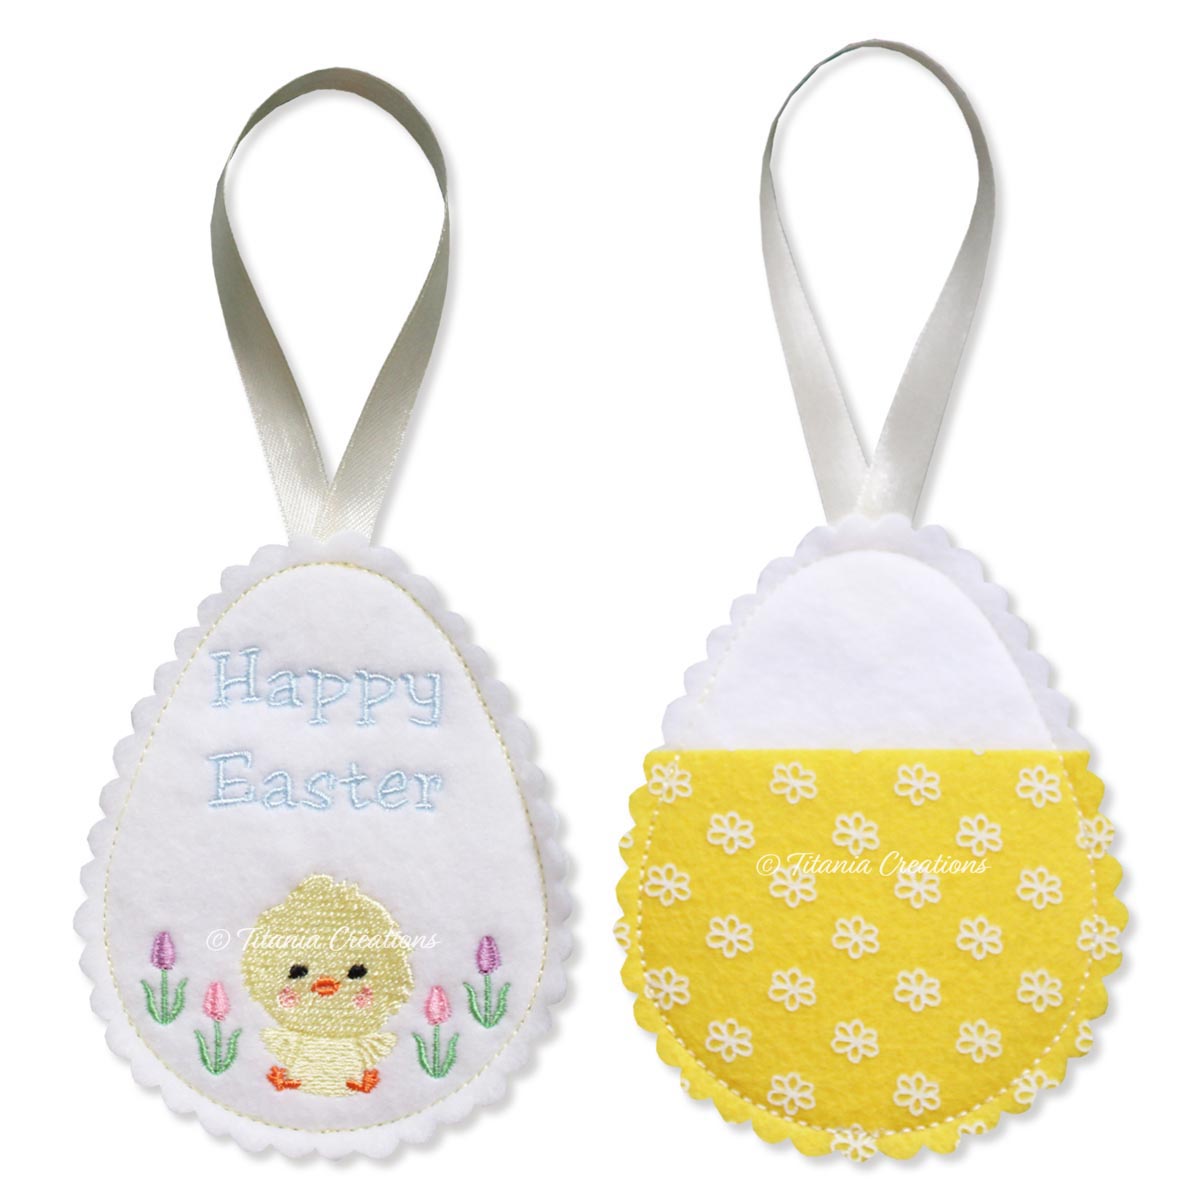 ITH Chick Easter Egg Treat Holder 4x4 5x7